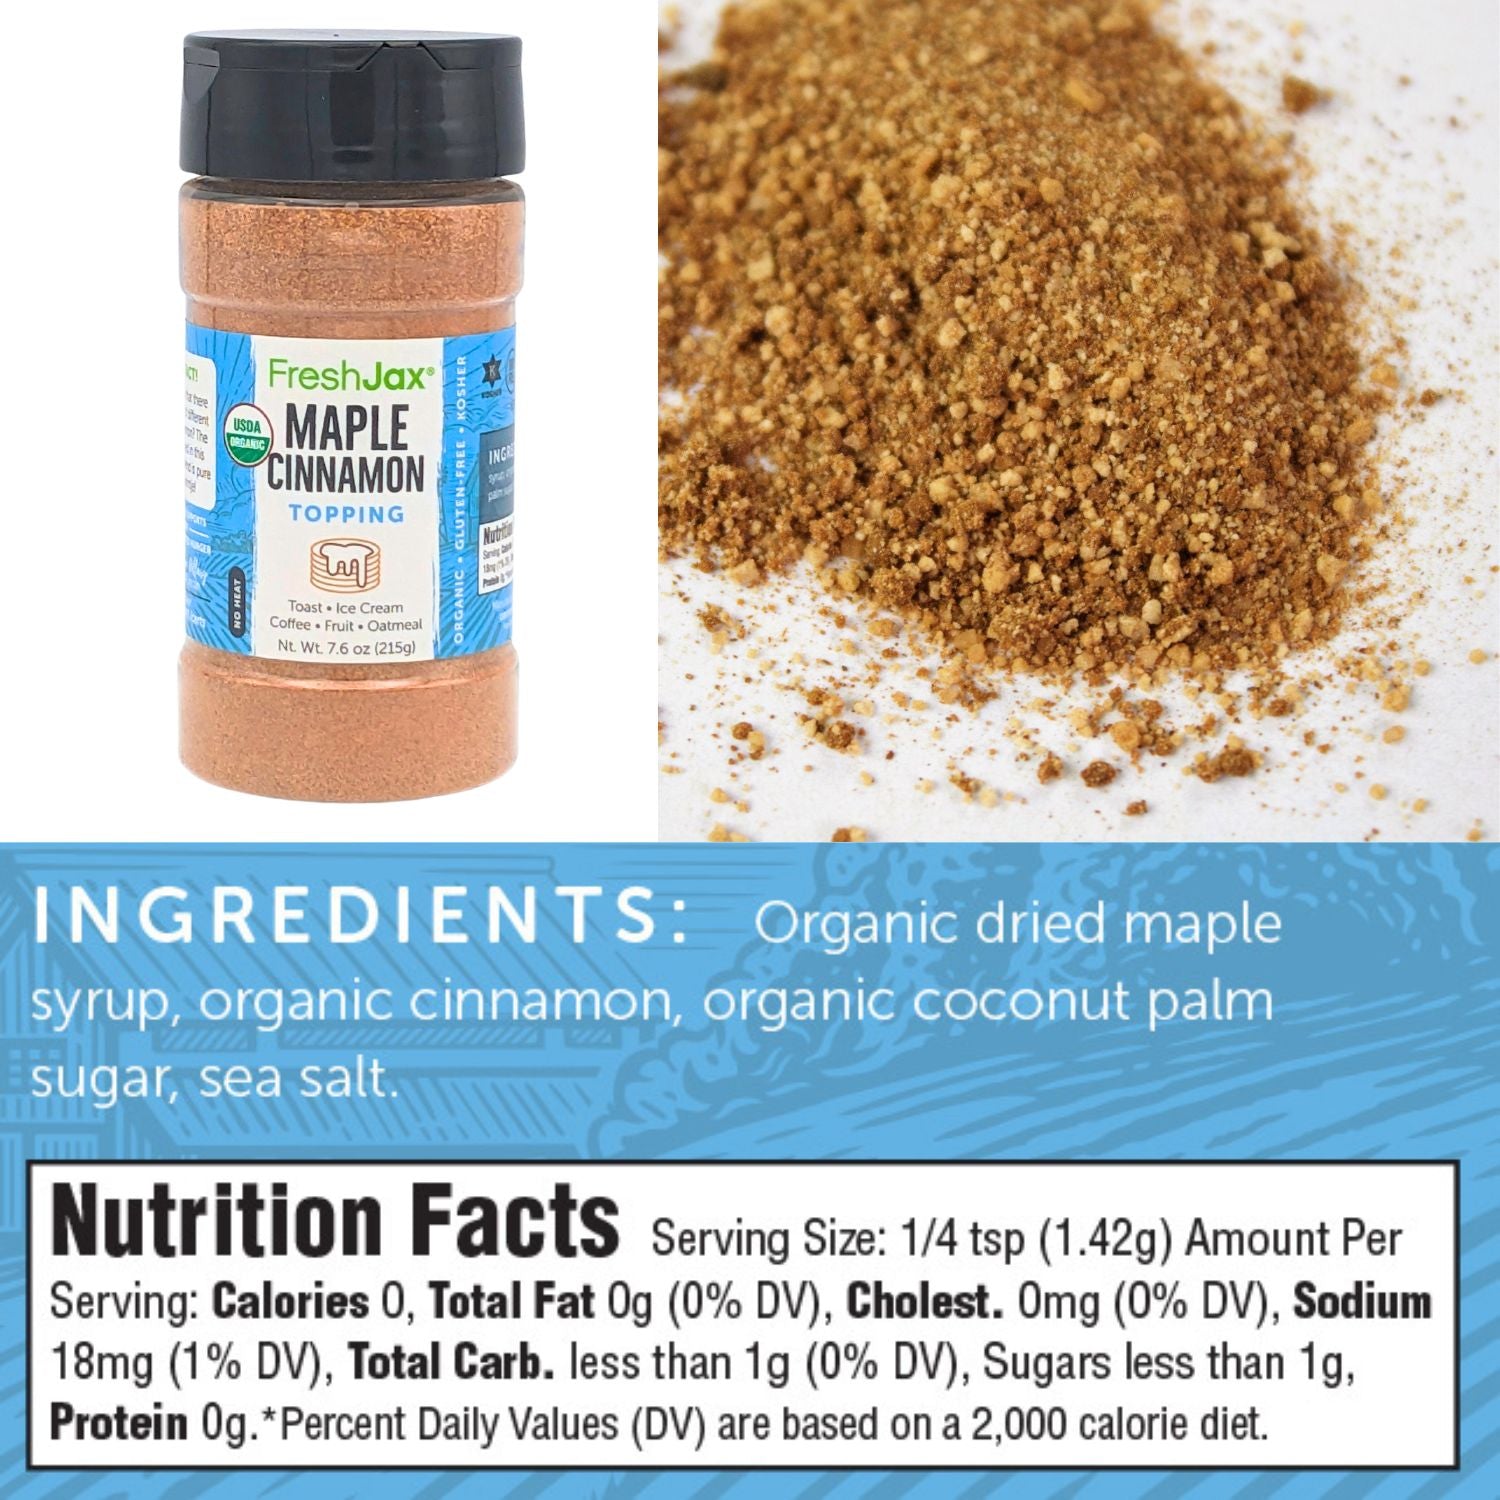 FreshJax Organic Spices Maple Cinnamon Ingredients and Nutritional Facts